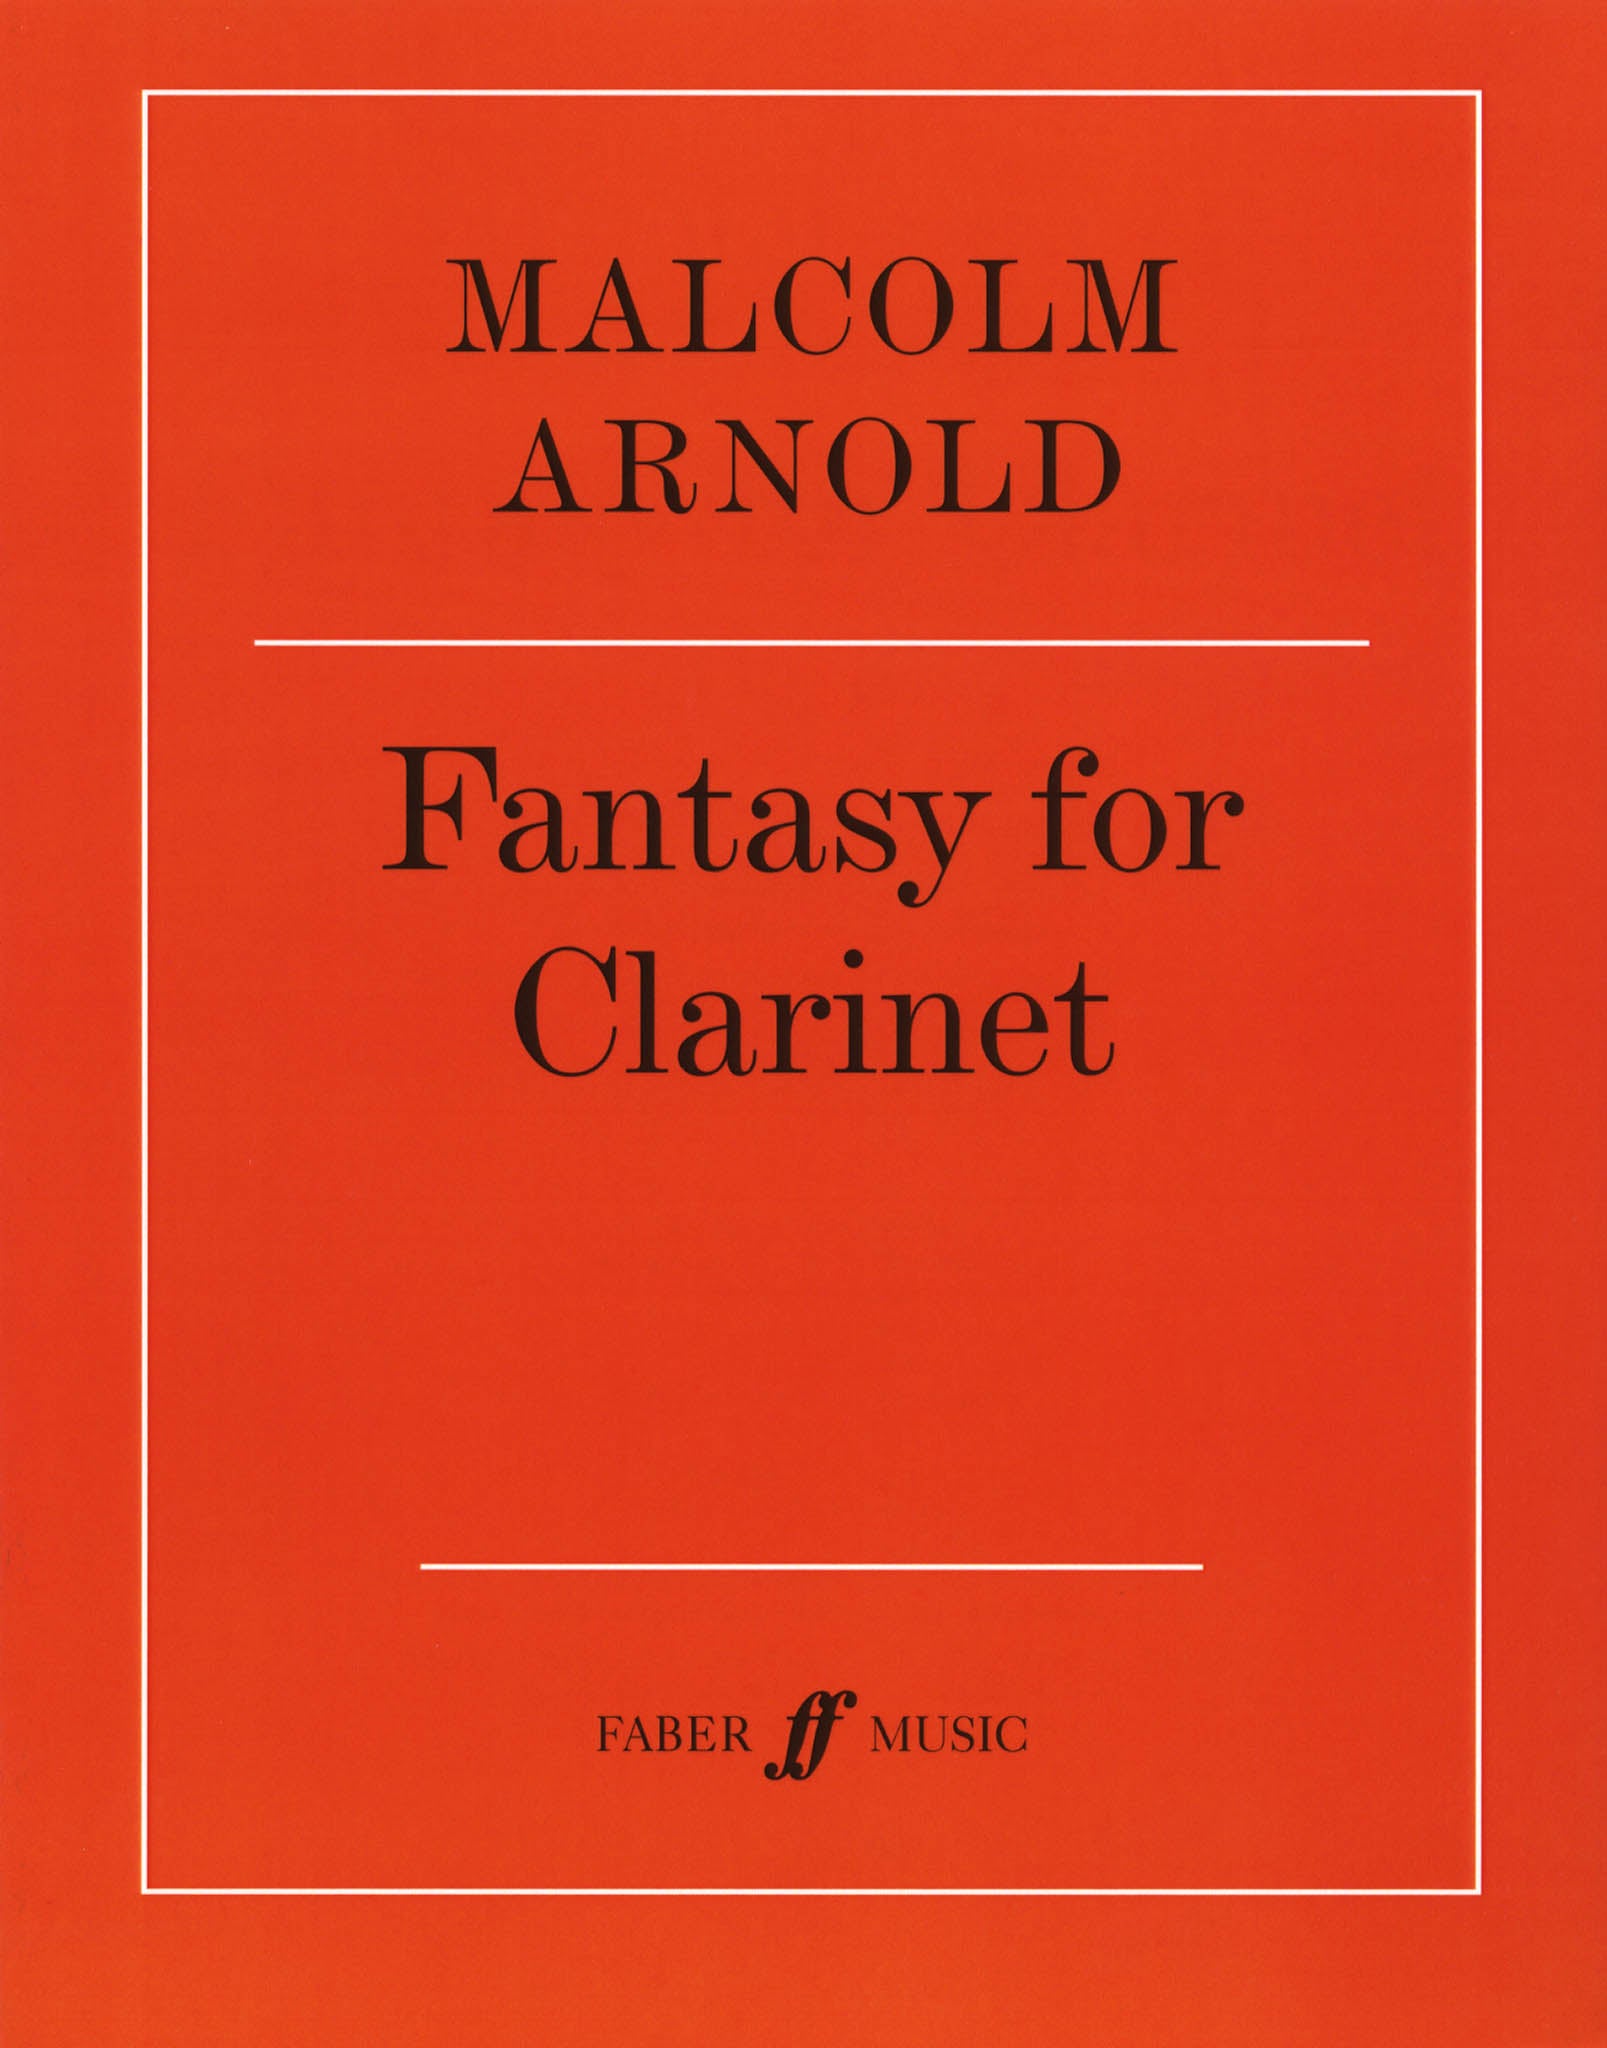 Arnold Fantasy for Clarinet, Op. 87 Cover